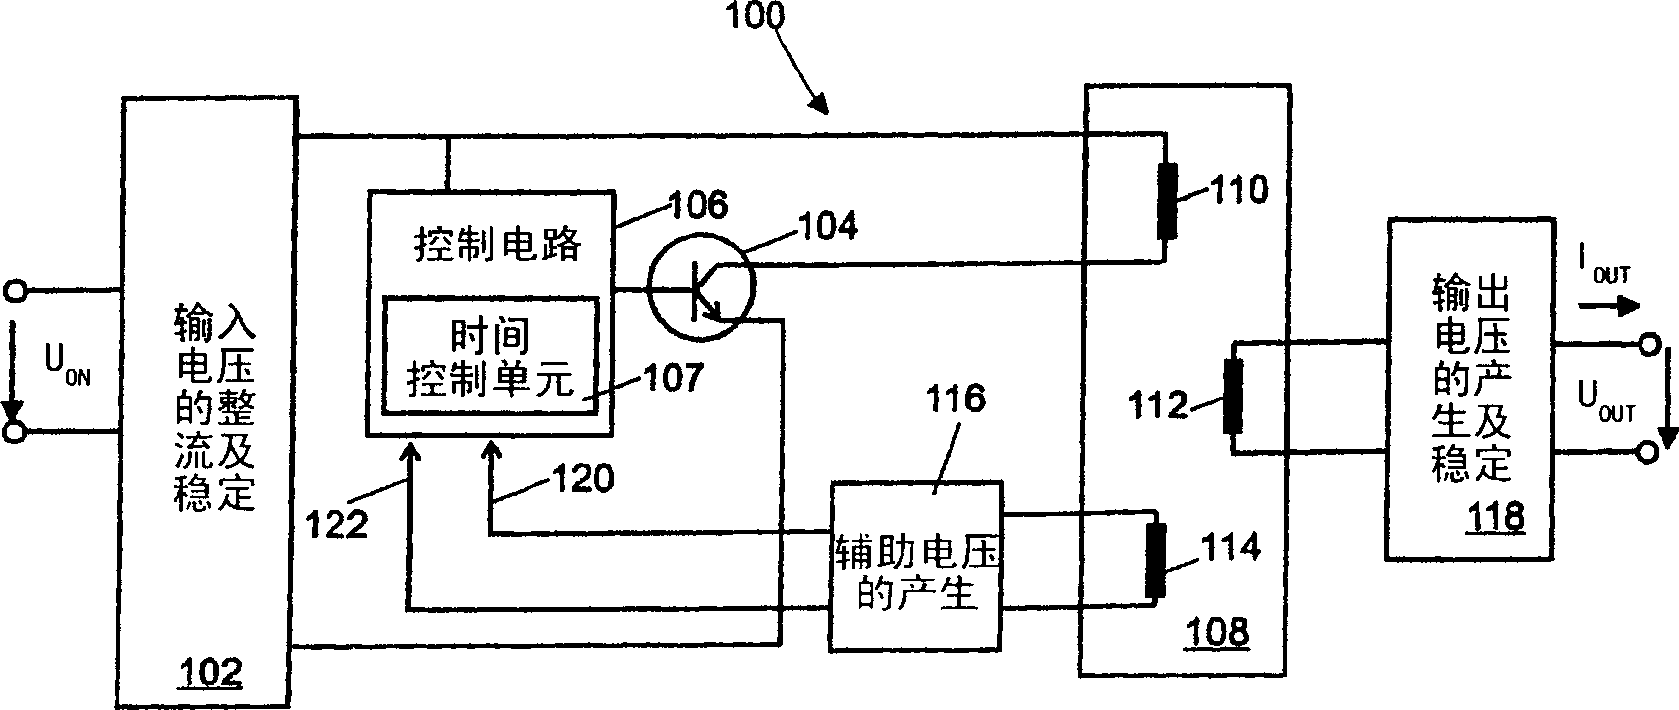 Control circuit for the switch in a switching power supply